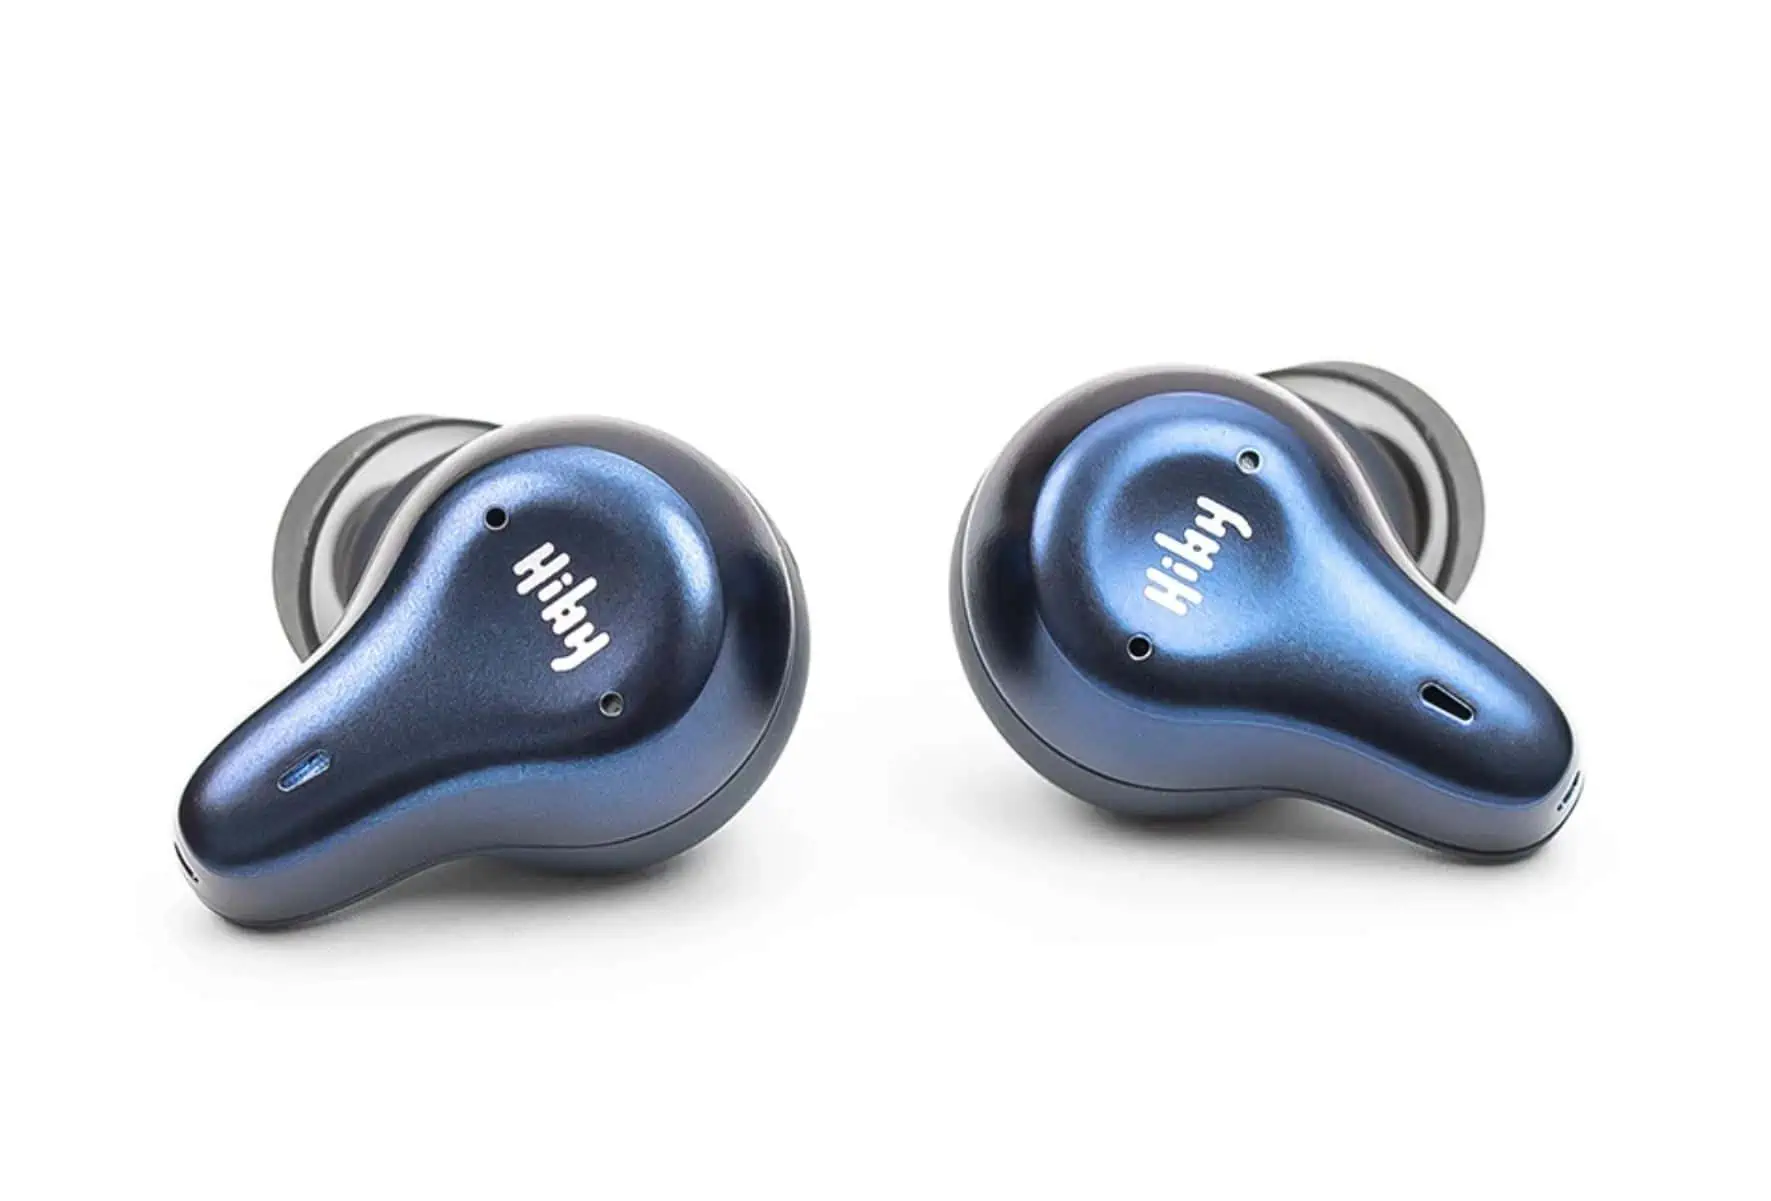 HiBy WH2 is an affordable truly wireless earbuds with LDAC support